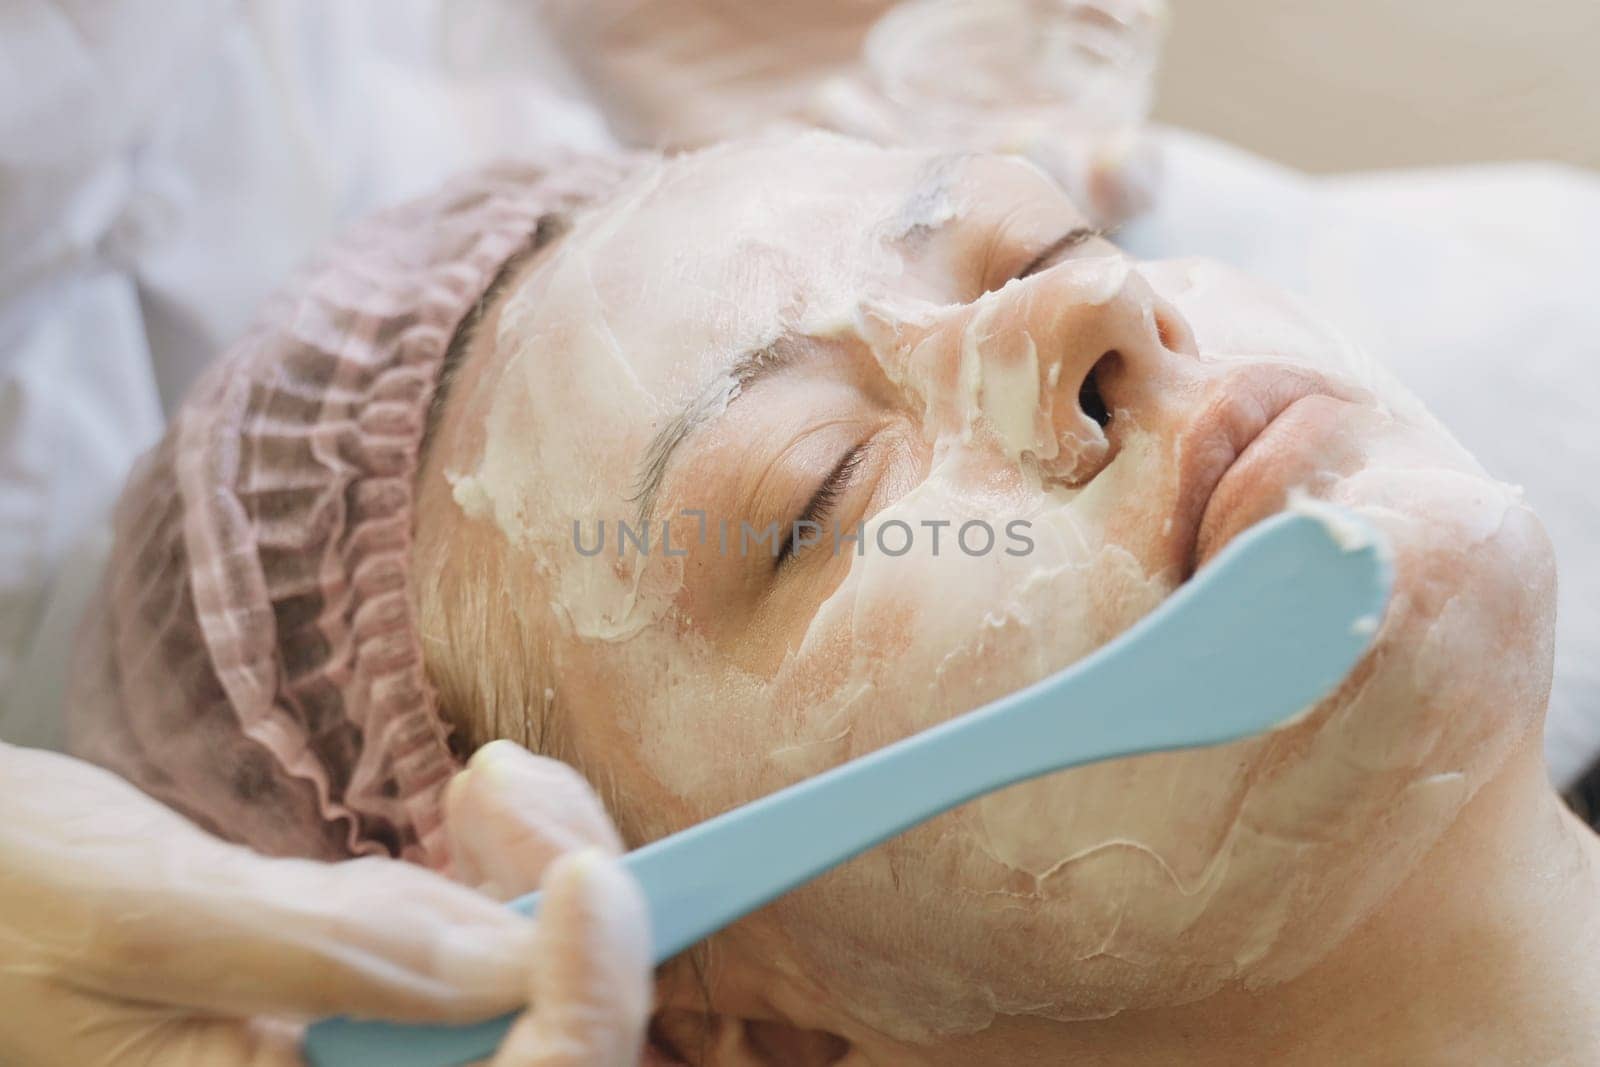 A woman is having a facial mask applied to her face in a spa setting. The skincare professional is gently smoothing on the mask for a revitalizing treatment.